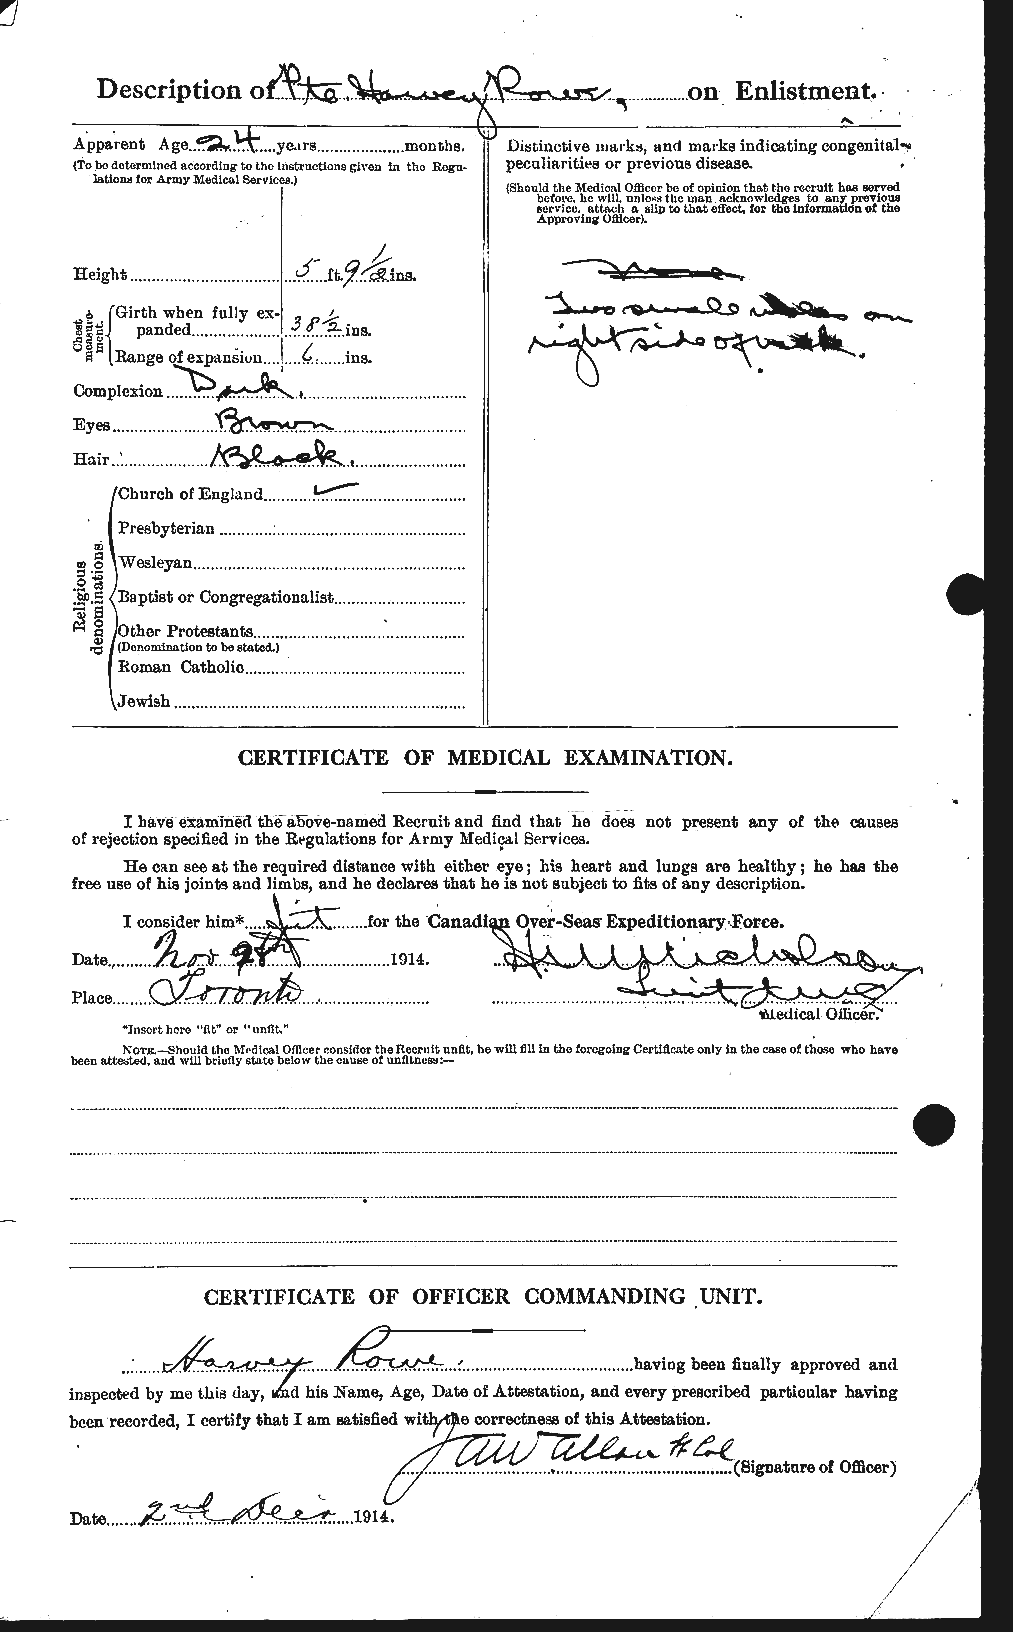 Personnel Records of the First World War - CEF 615896b